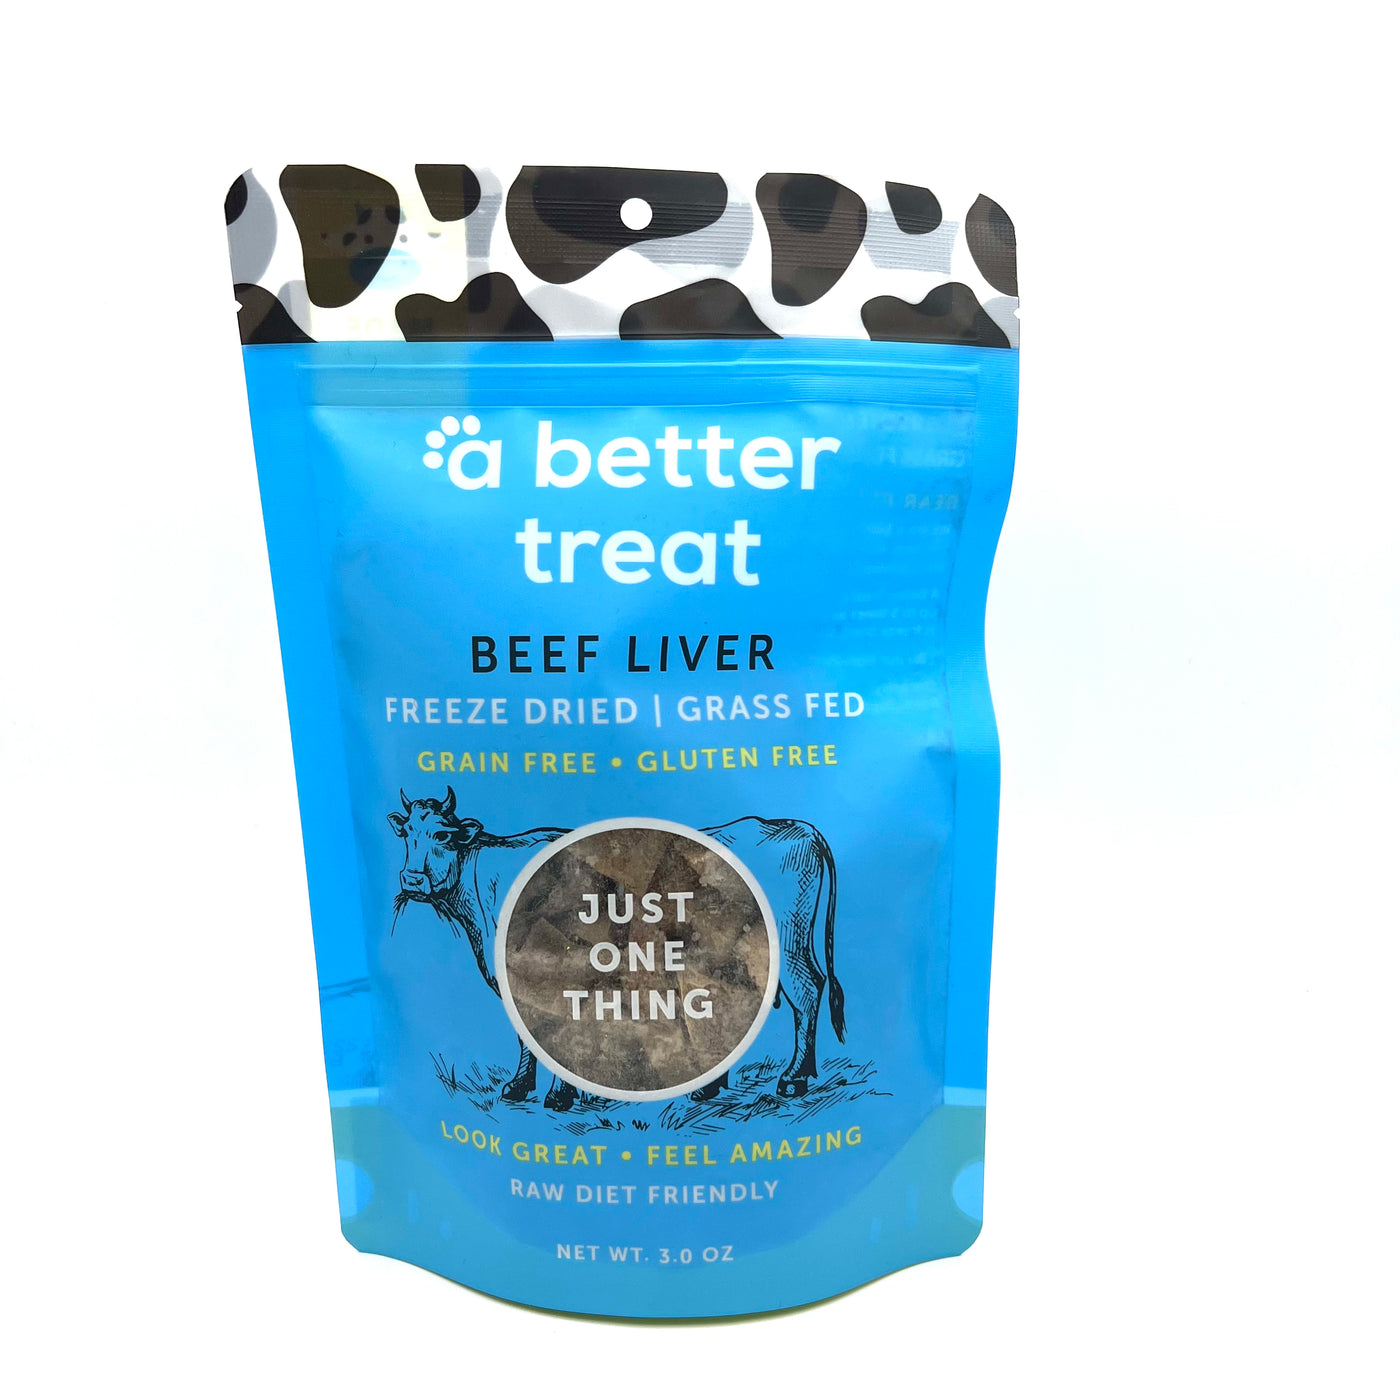 A Better Treat Beef Liver